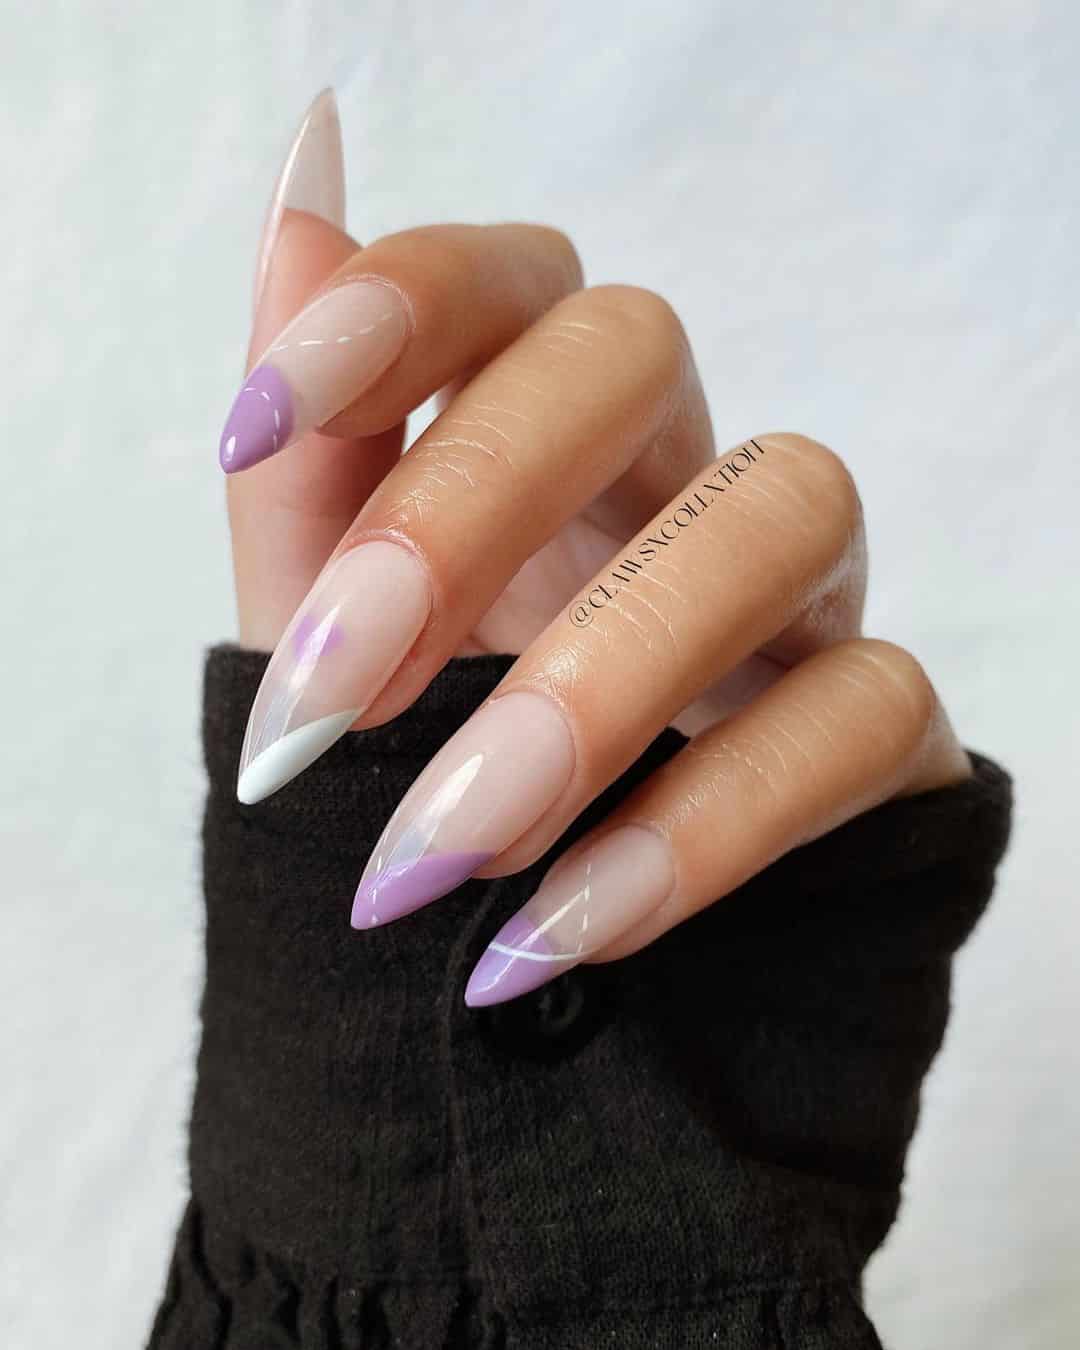 70 Stylish Summer Nails You Want to Copy This Year